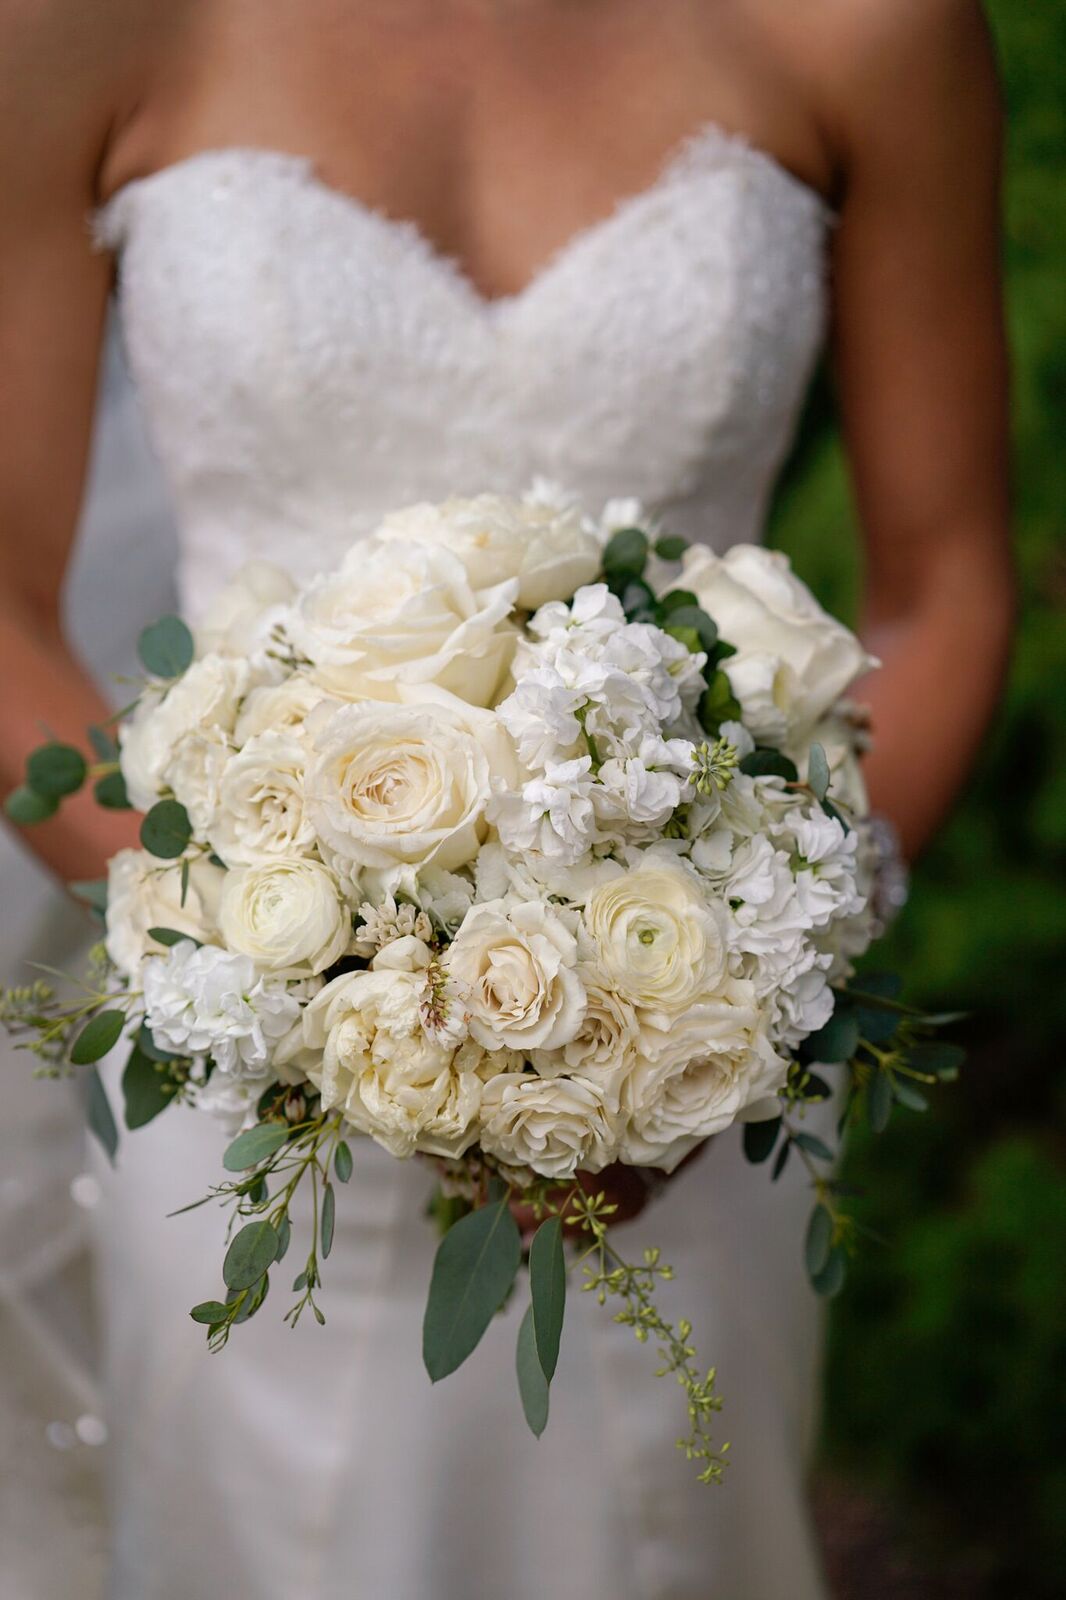 A gorgeous all white bridal bouquet was the perfect elegant touch for this upscale garden wedding we planned.